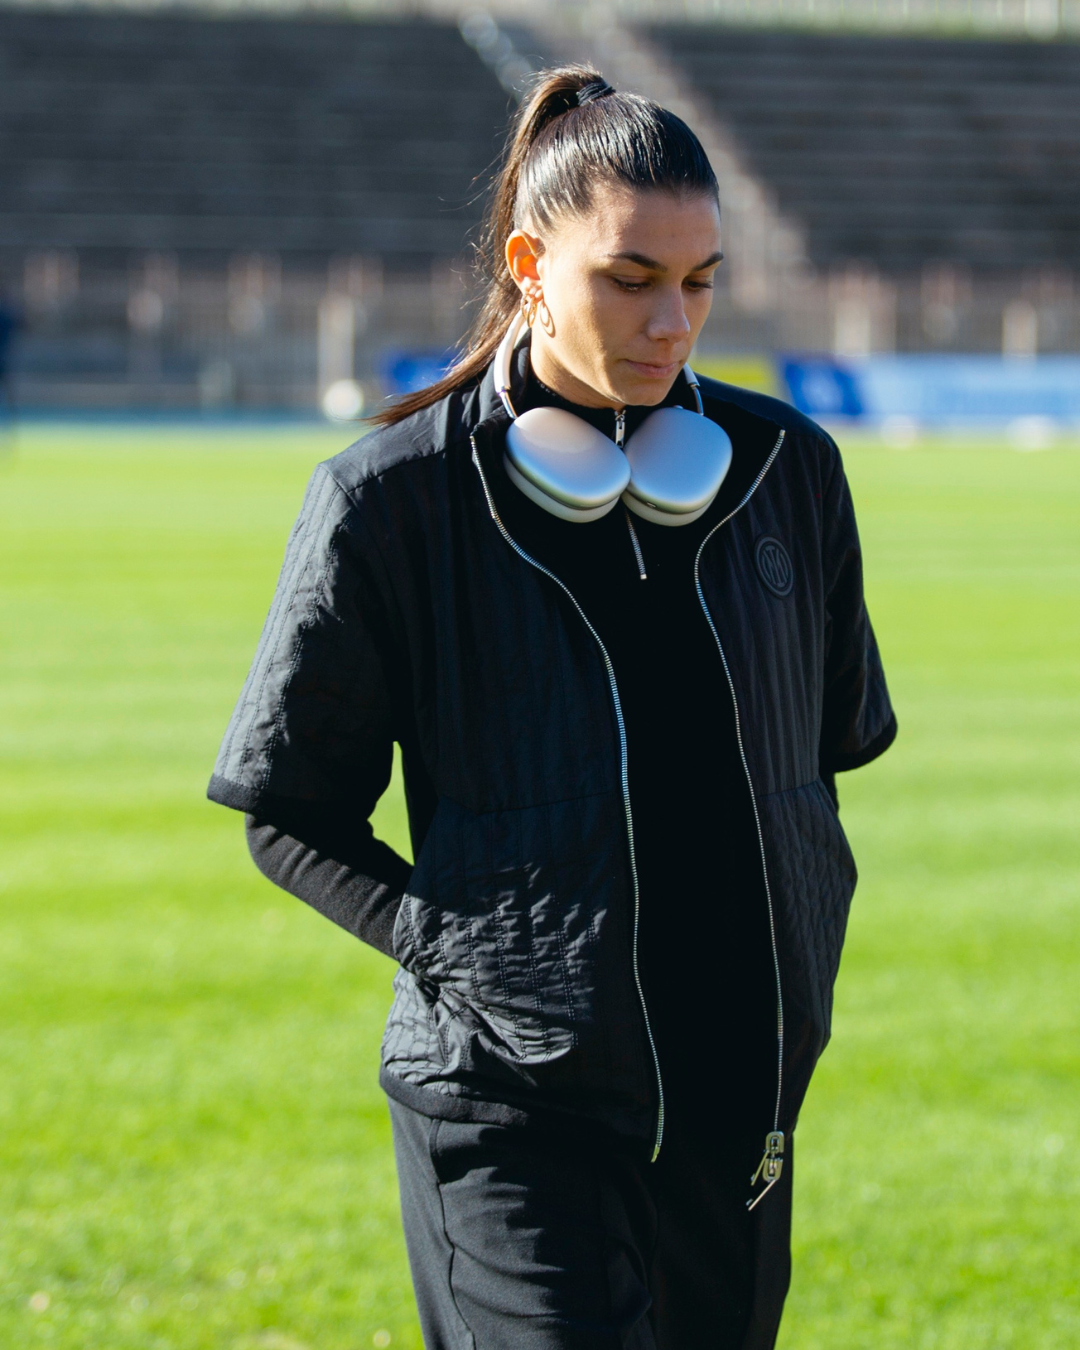 The new Nike ESC collection presented by the Inter women's The footballers arrived at the Arena Civica in festive attire to realizzata The footballers arrived at the Arena Civica in festive attire to celebrate the 25-year partnership between Nike and Inter